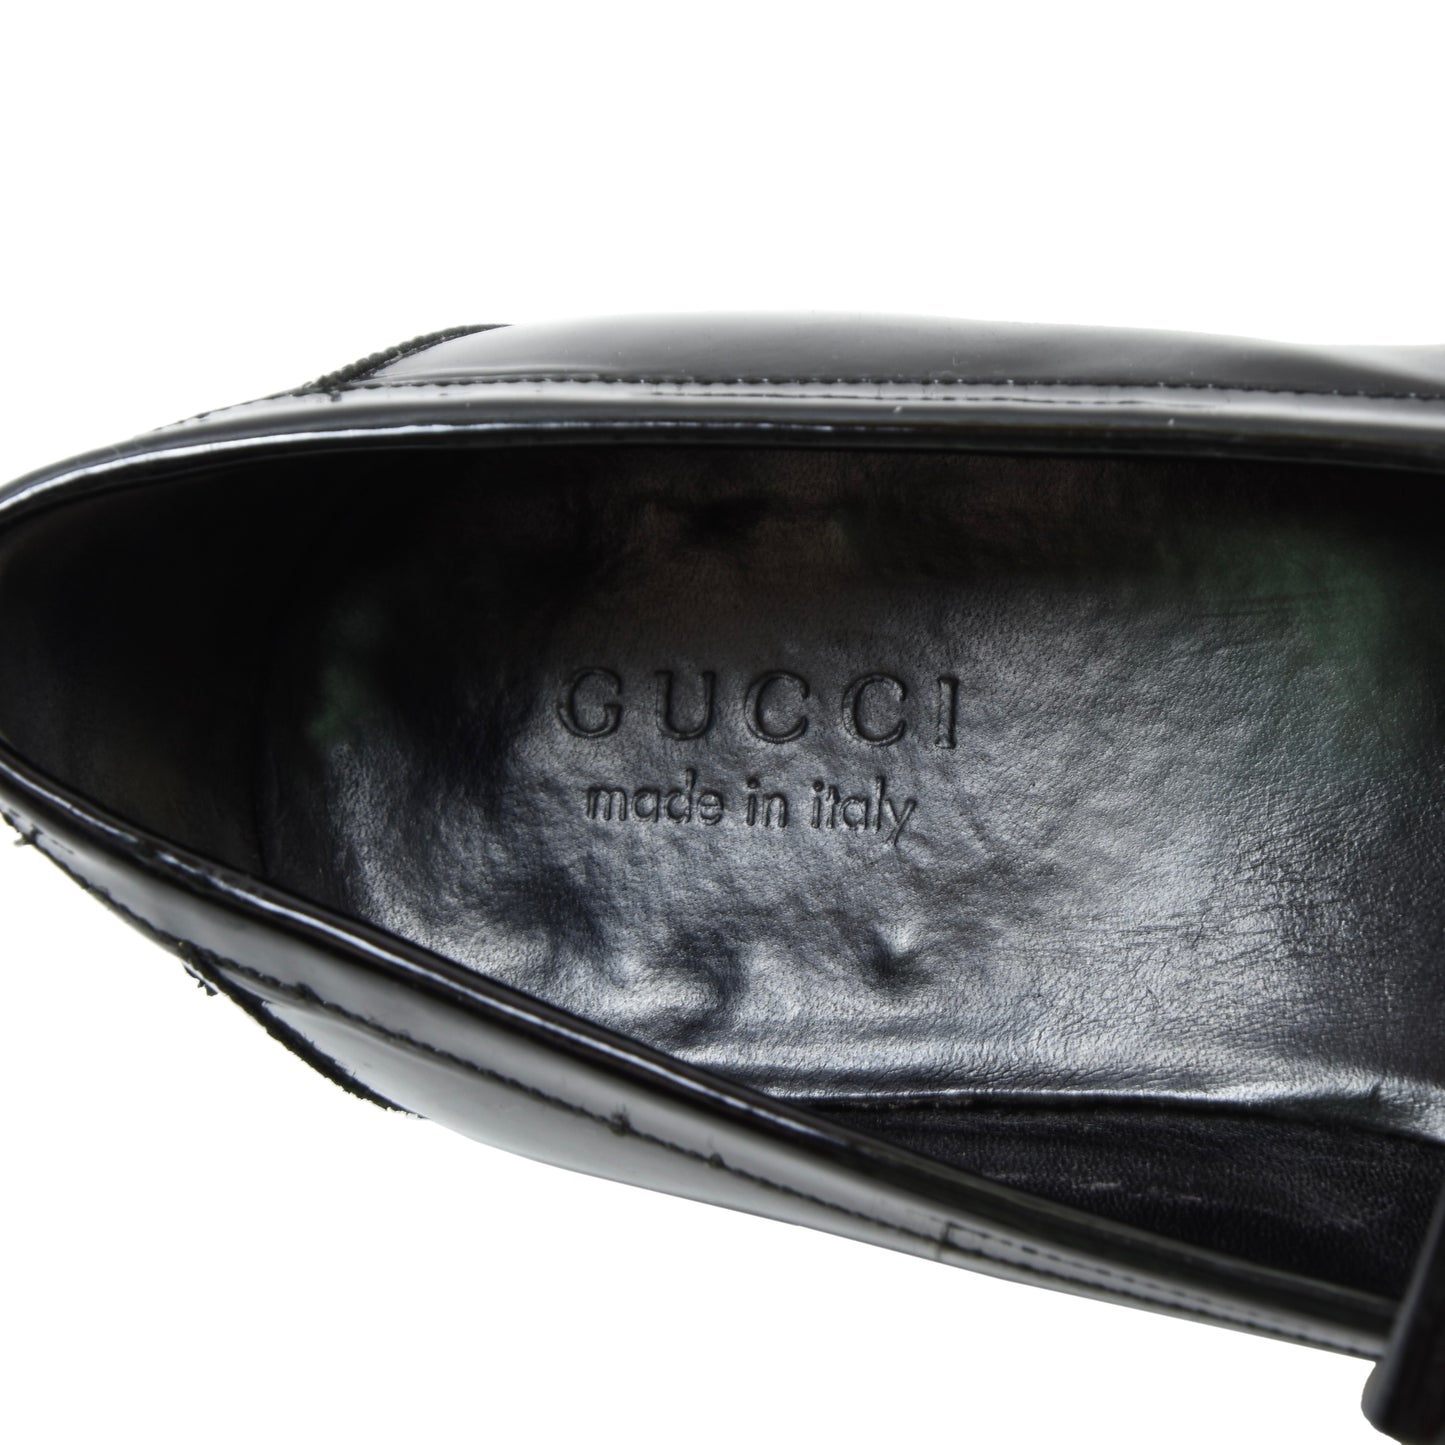 Gucci Patent Leather Tassle Loafers/Shoes Size 43 1/2E - Black